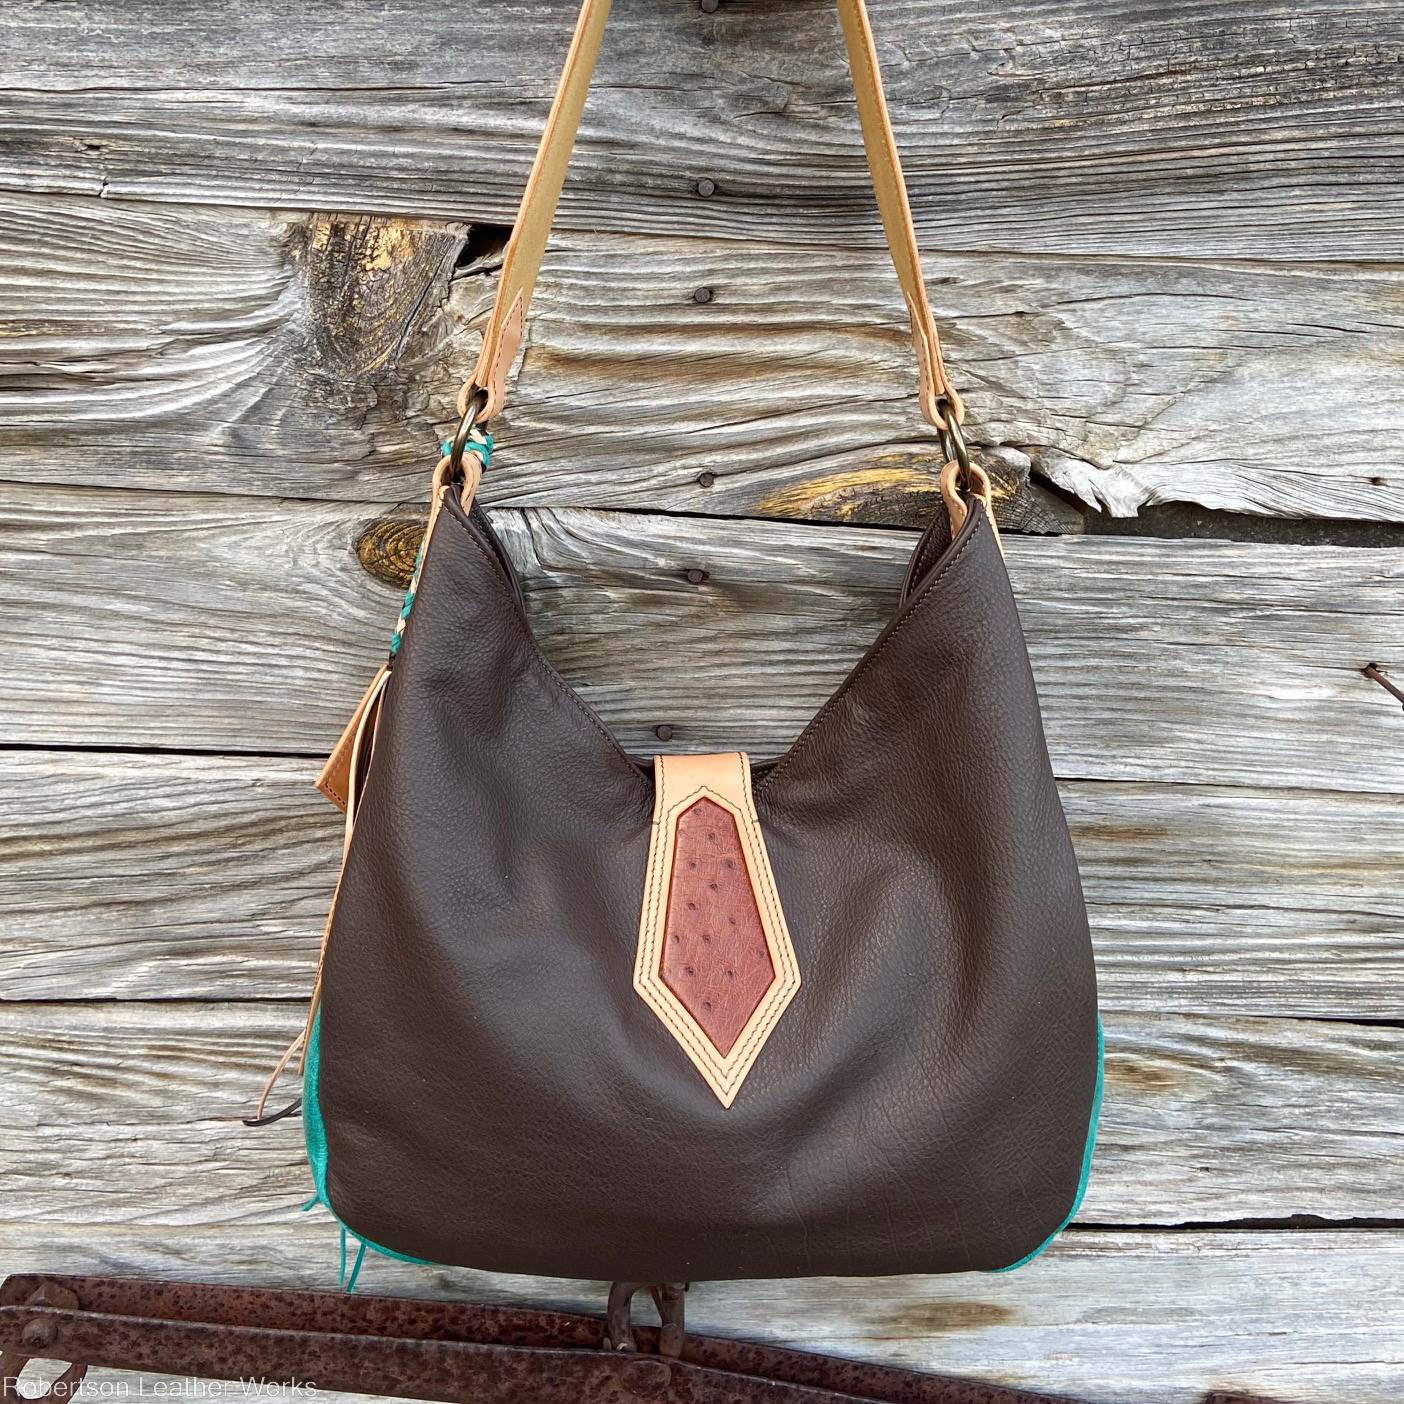 The Sarah Purse with Ostrich Inlays